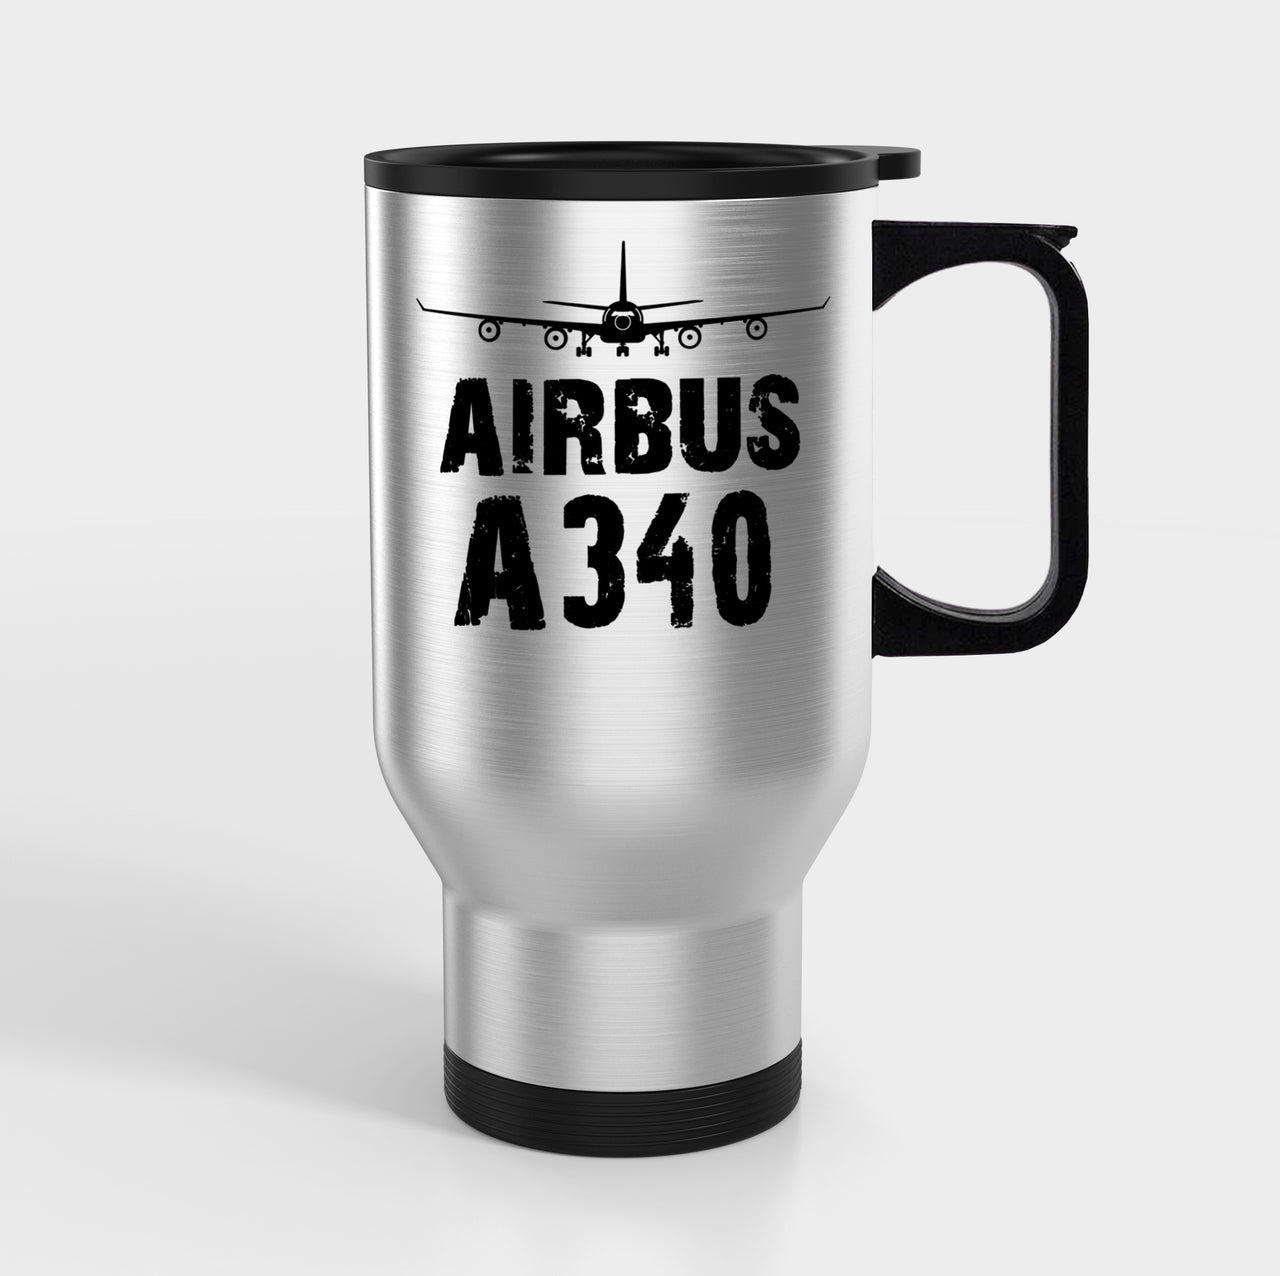 Airbus A340 & Plane Designed Travel Mugs (With Holder)